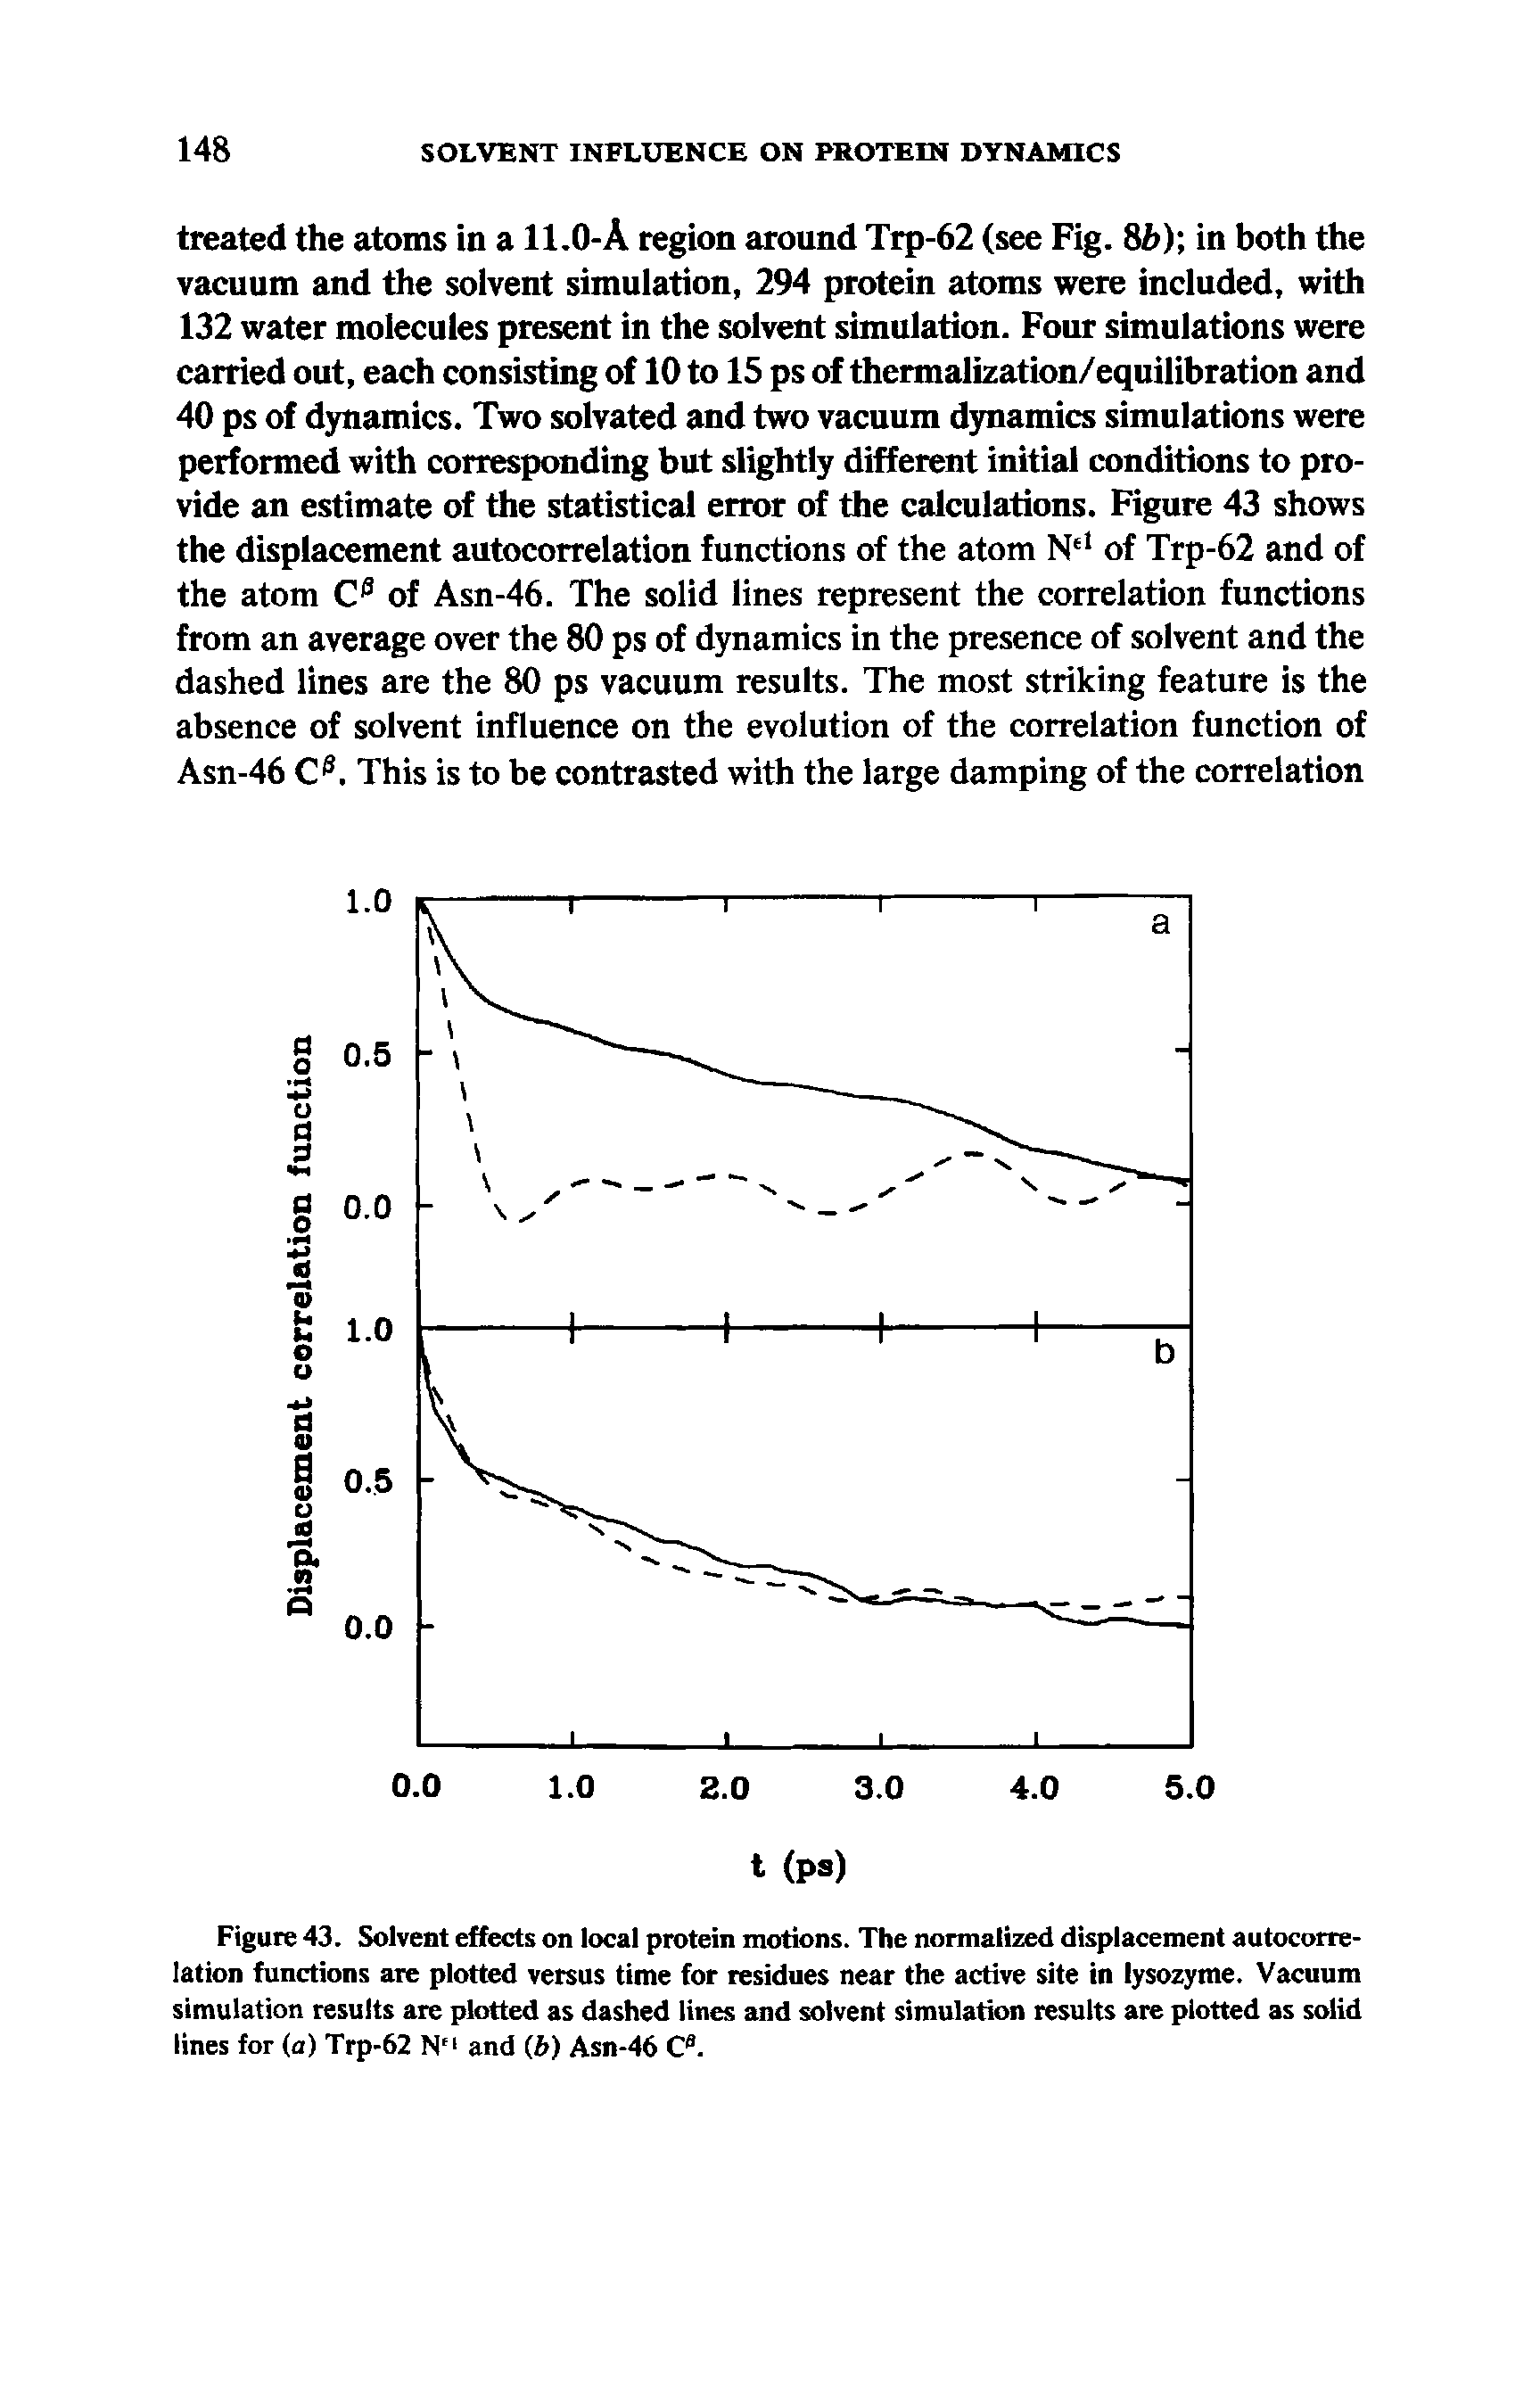 Figure 43. Solvent effects on local protein motions. The normalized displacement autocorrelation functions are plotted versus time for residues near the active site in lysozyme. Vacuum simulation results are plotted as dashed lines and solvent simulation results are plotted as solid lines for (a) Trp-62 N 1 and (b) Asn-46 Cfl.